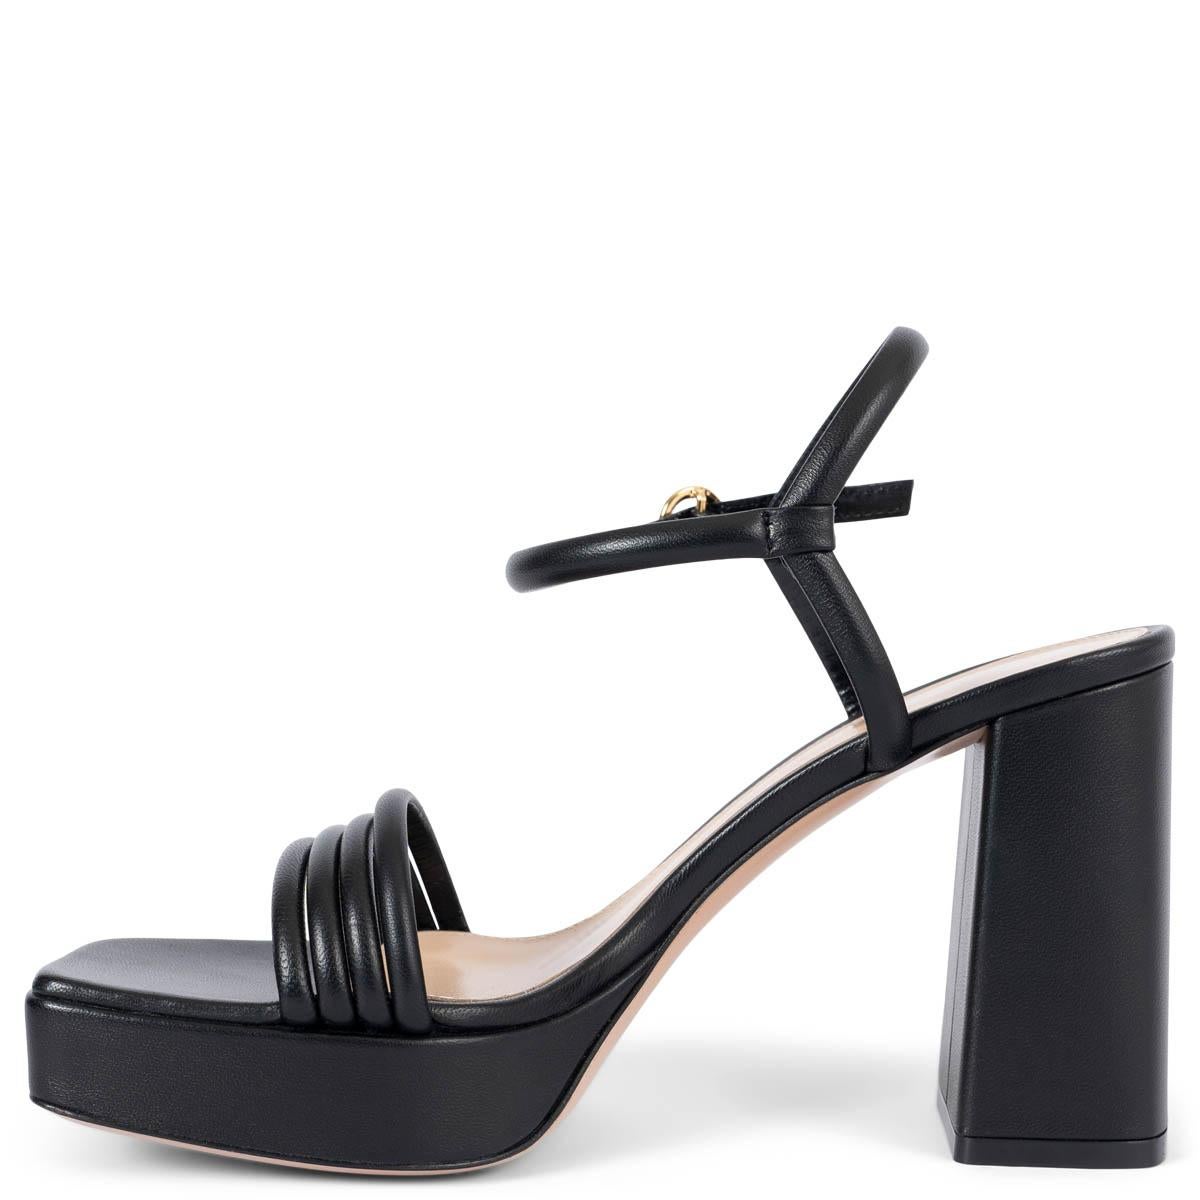 GIANVITO ROSSI black leather LENA 95 Platform Sandals Shoes 36 In New Condition For Sale In Zürich, CH